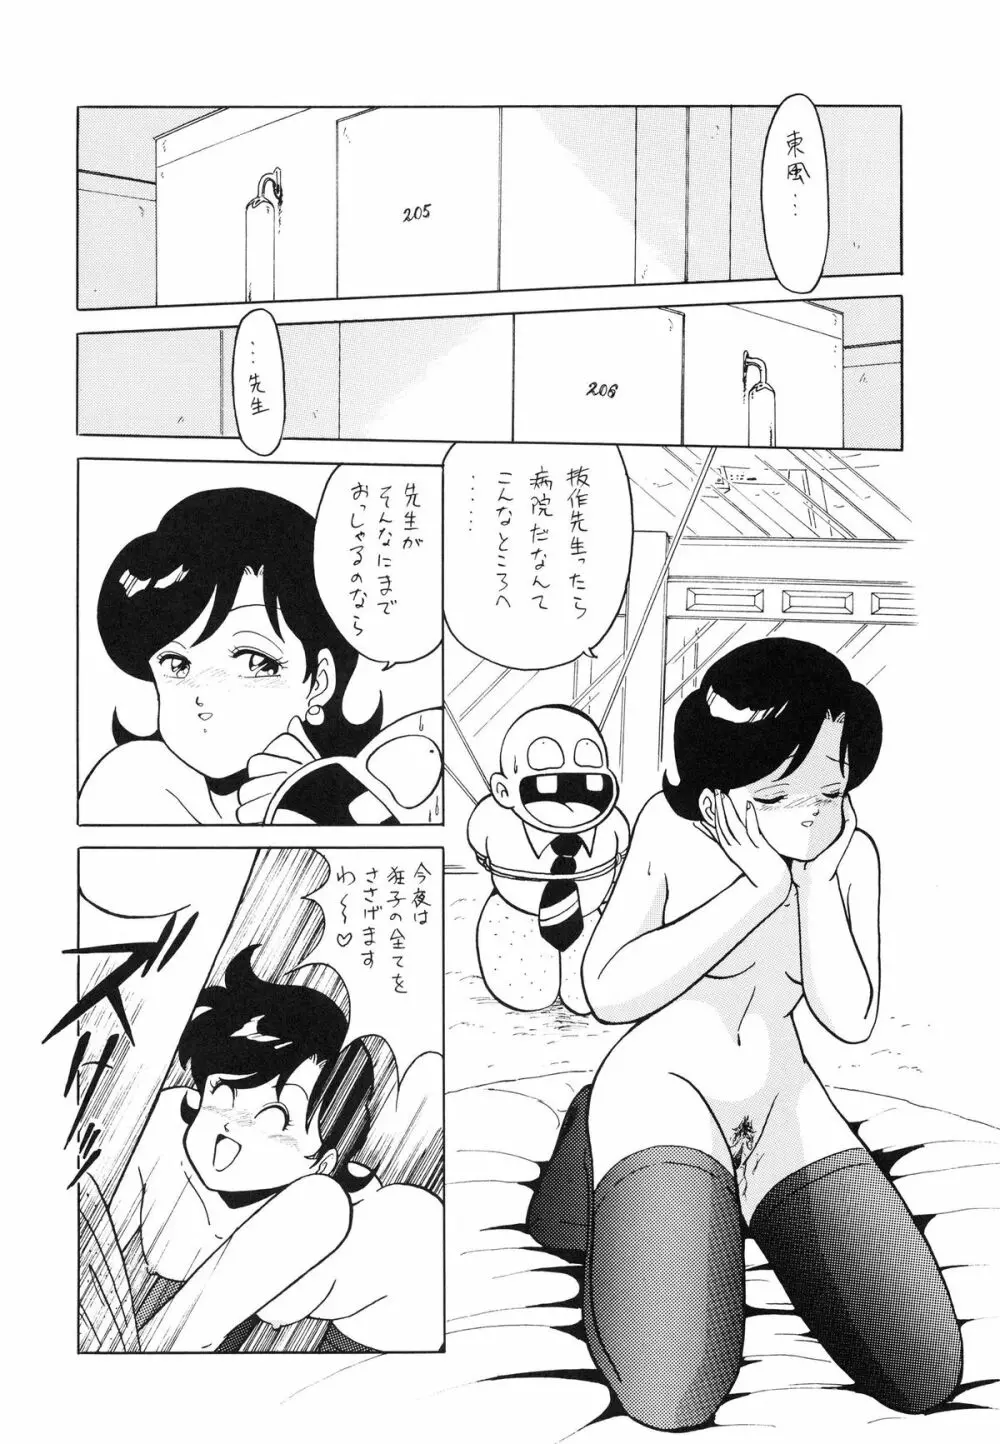 RAINBOW CHASER TENT HOUSE Vol.XI Page.20